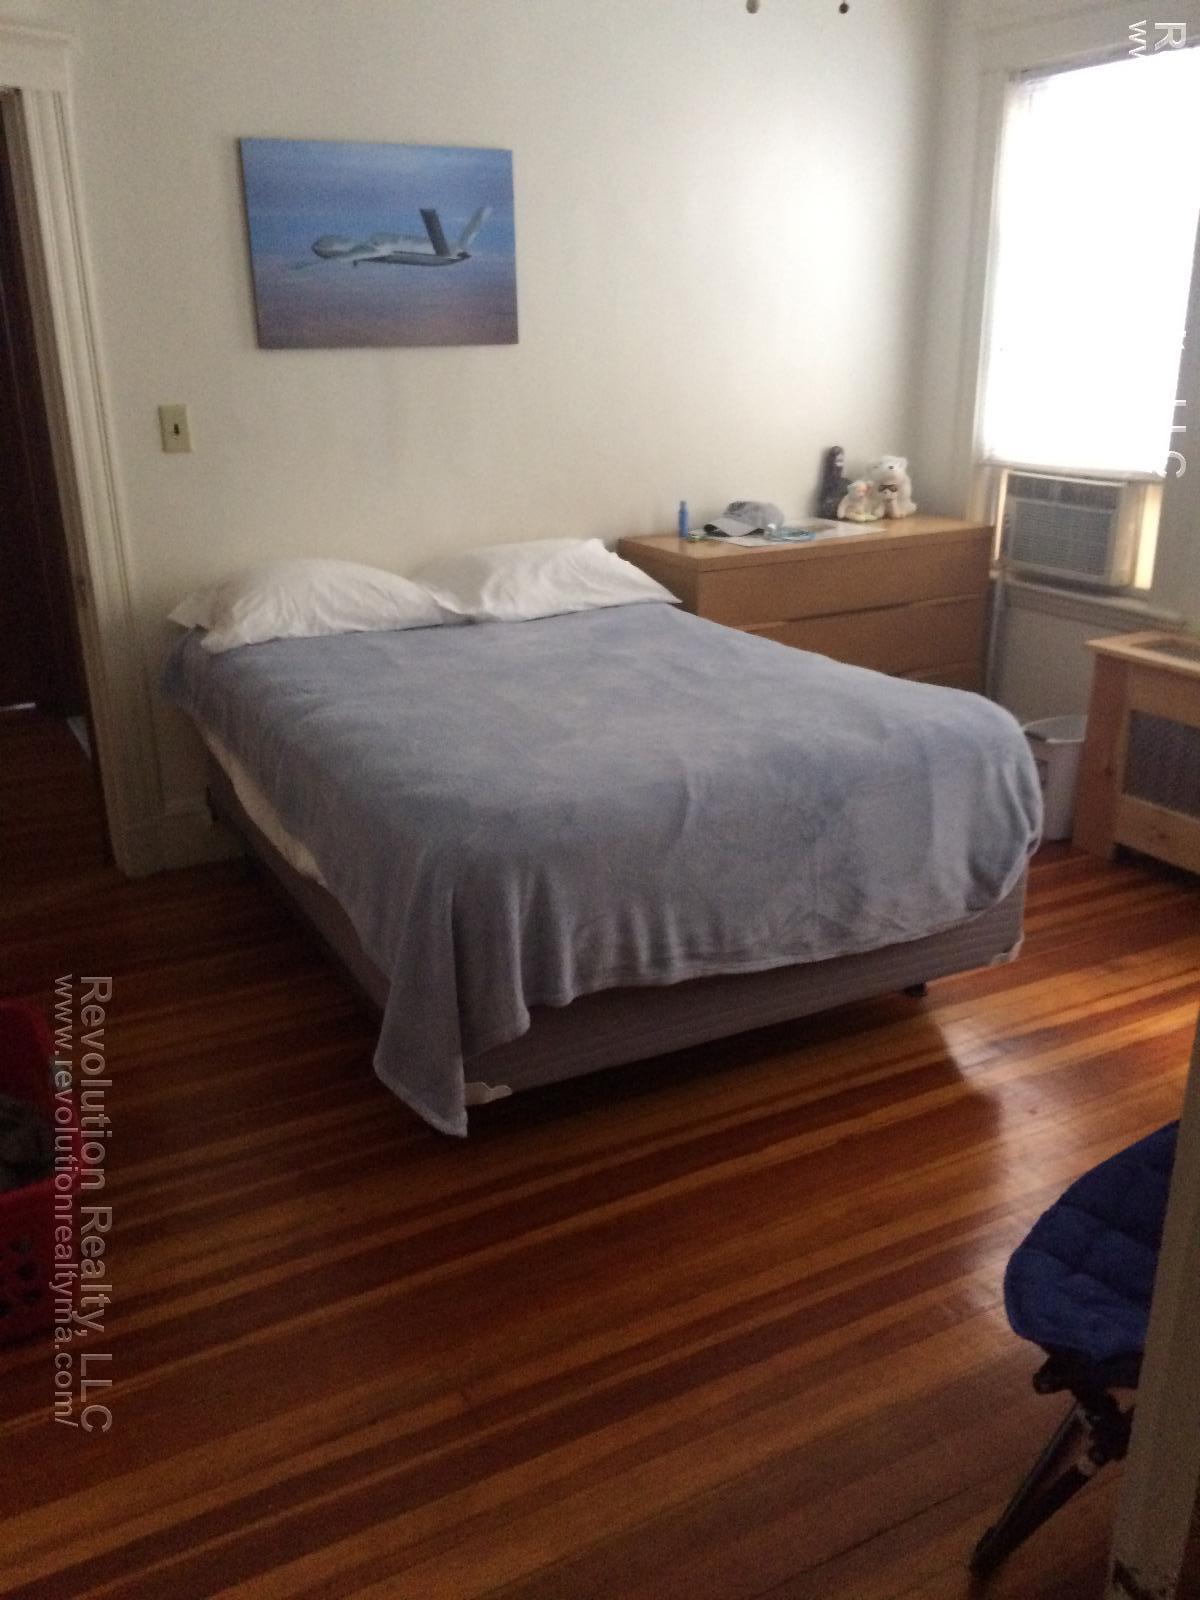 Photos of apartment on Quincy St.,Medford MA 02155